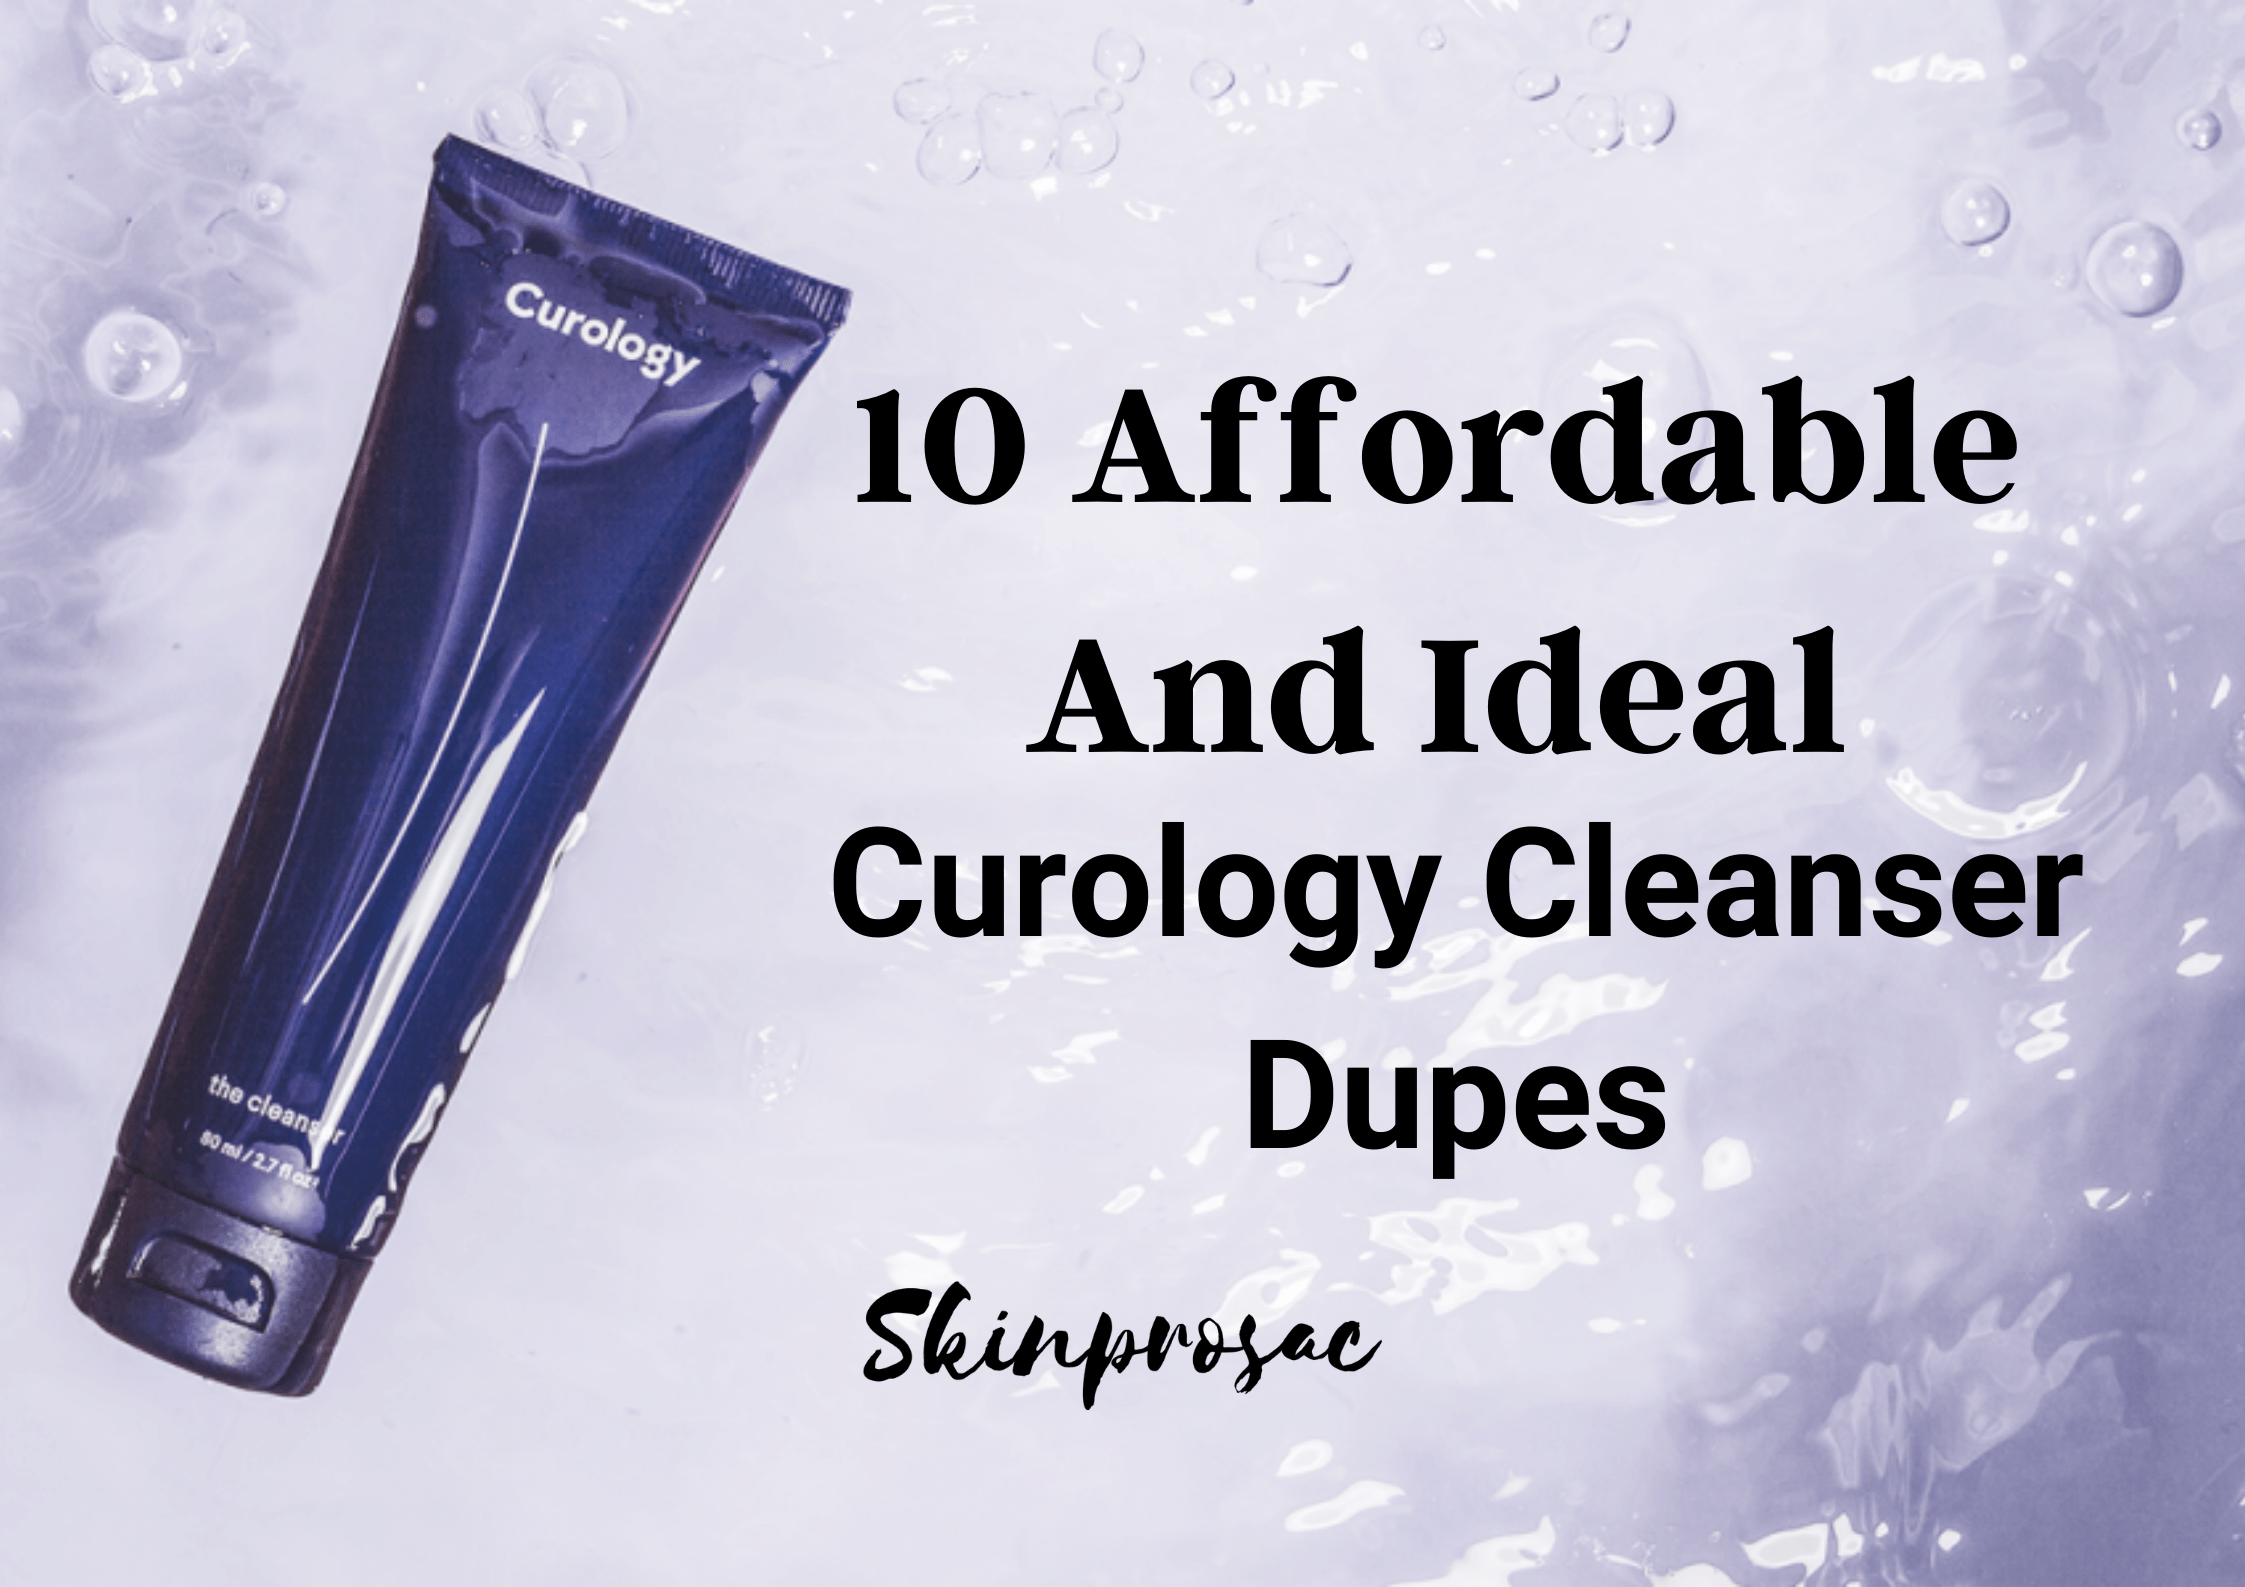 Curology Cleanser Dupe